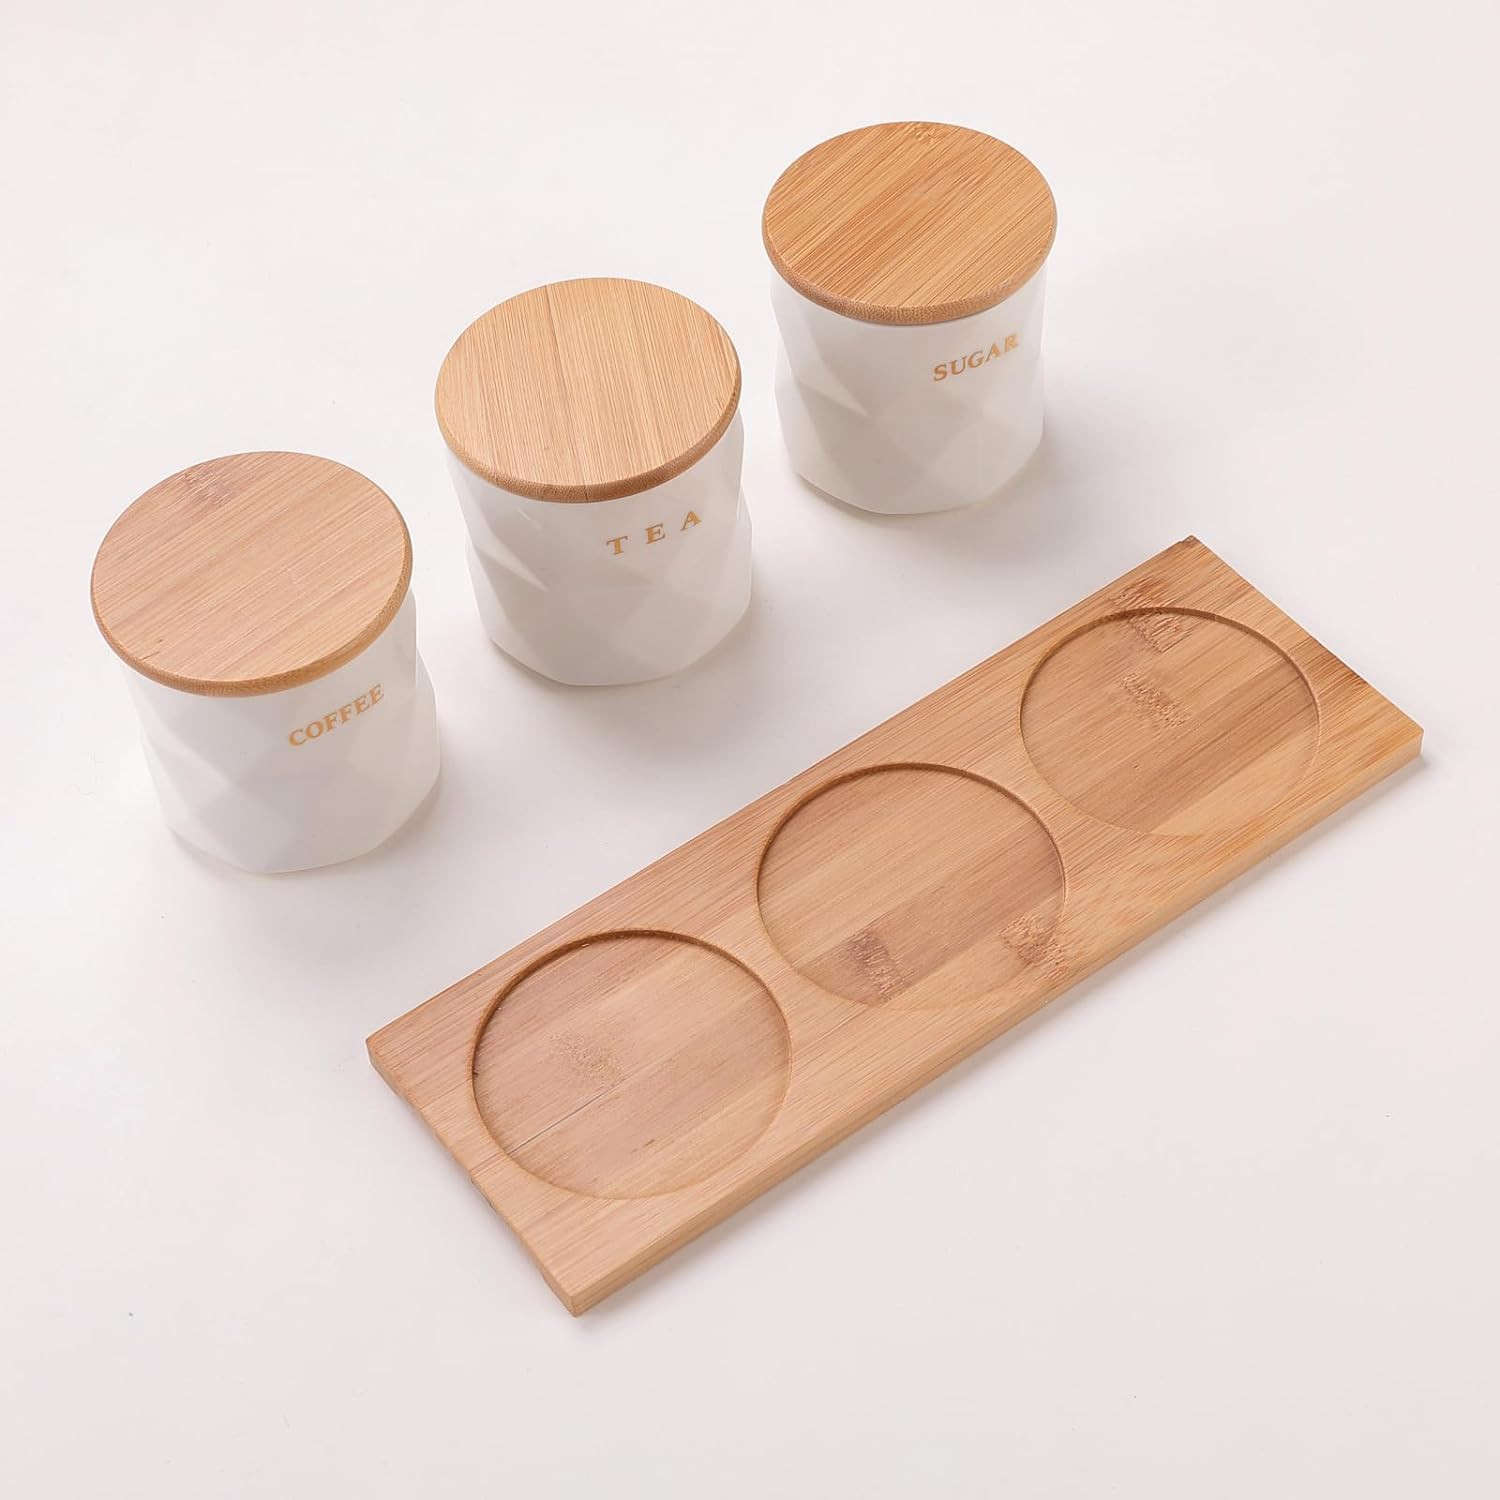 Kuber Industries Kitchen Storage Box | Spoon and Wooden Tray Spice Container | Round Condiment Jar | Air-Tight Bamboo Lid Kitchen Set | Small | Set of 3 | PLS761-1S | 300 ML | White